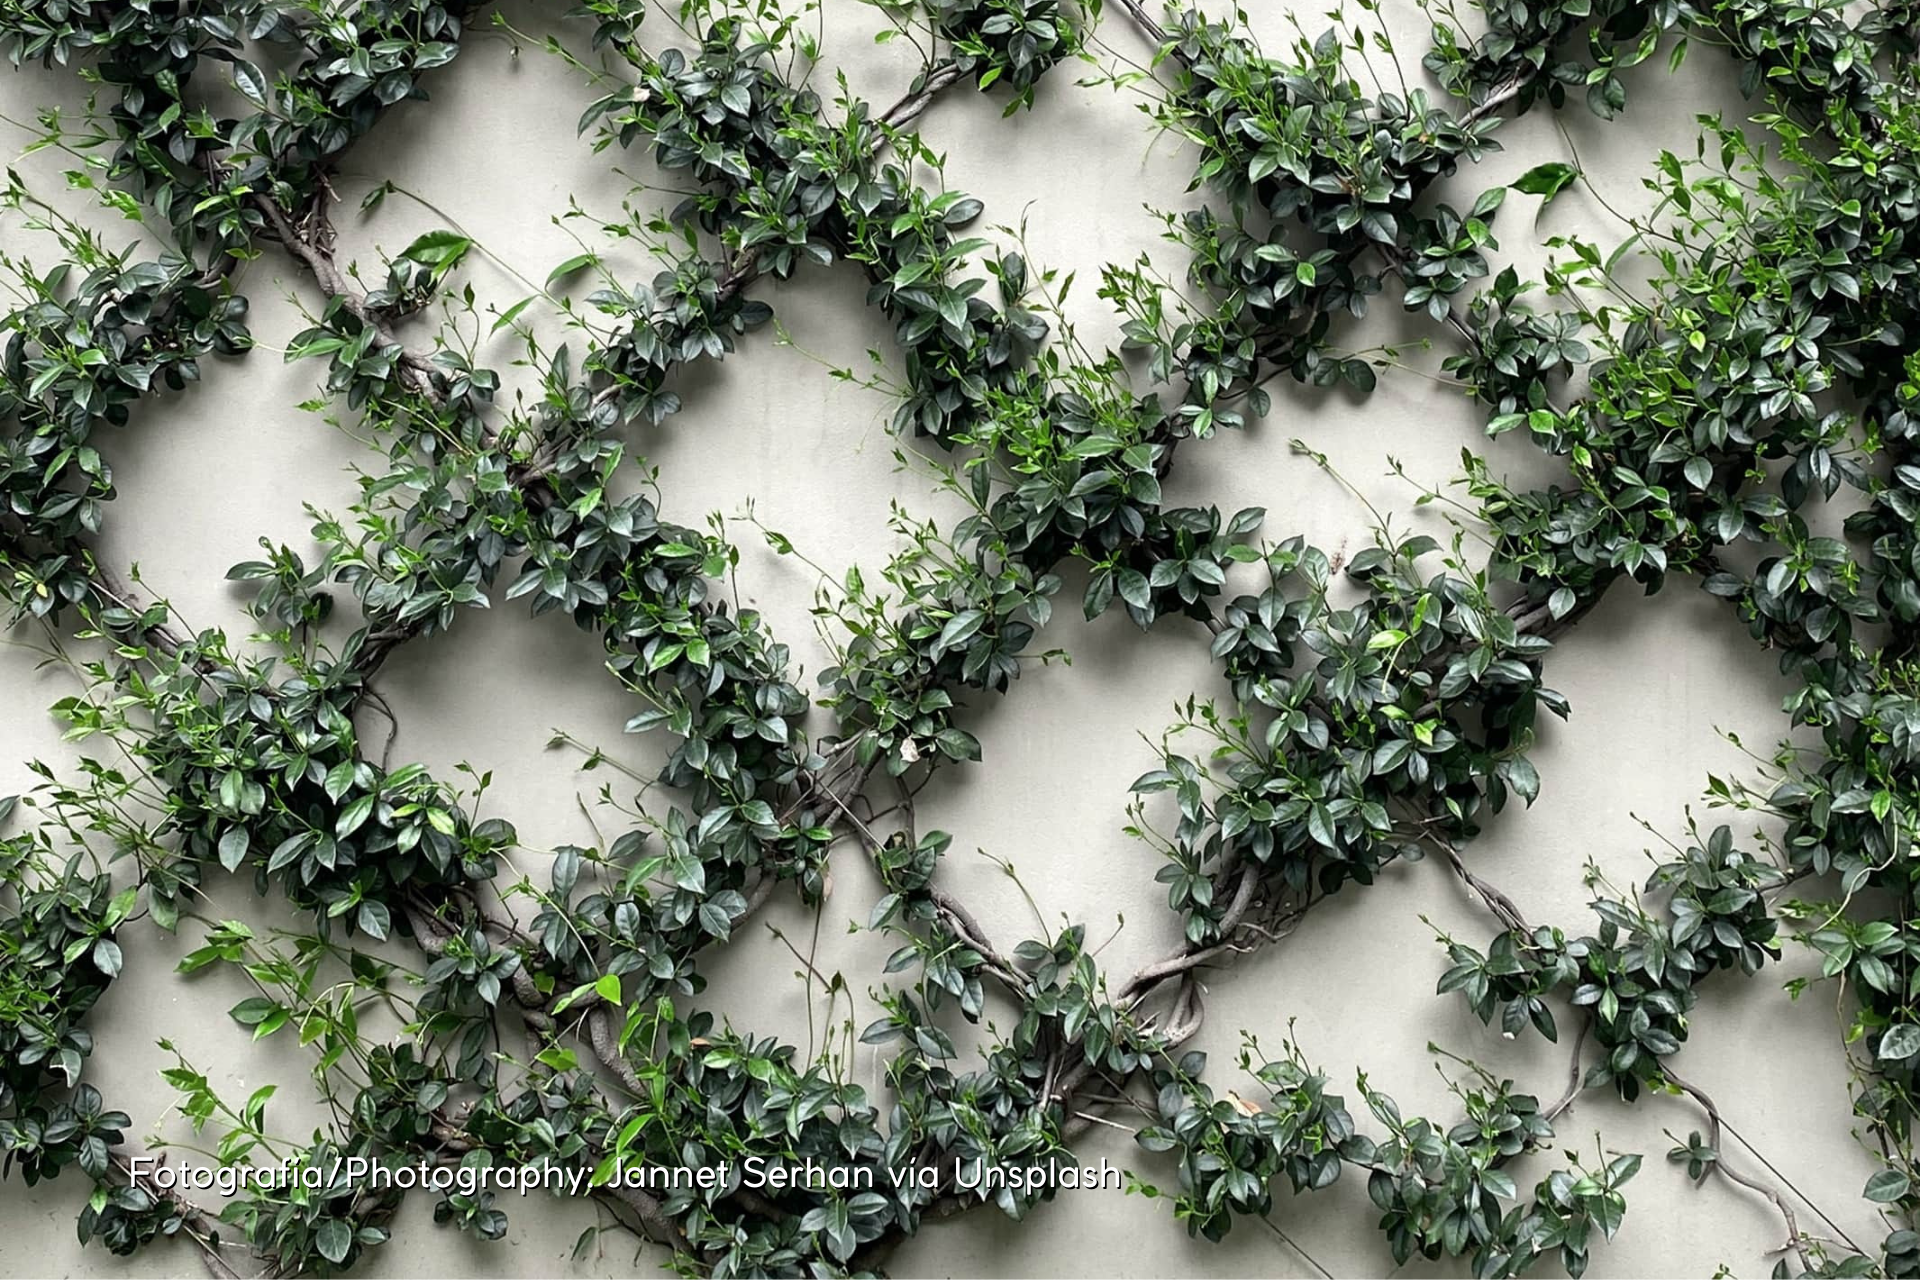 How to create a wall with climbing plants?